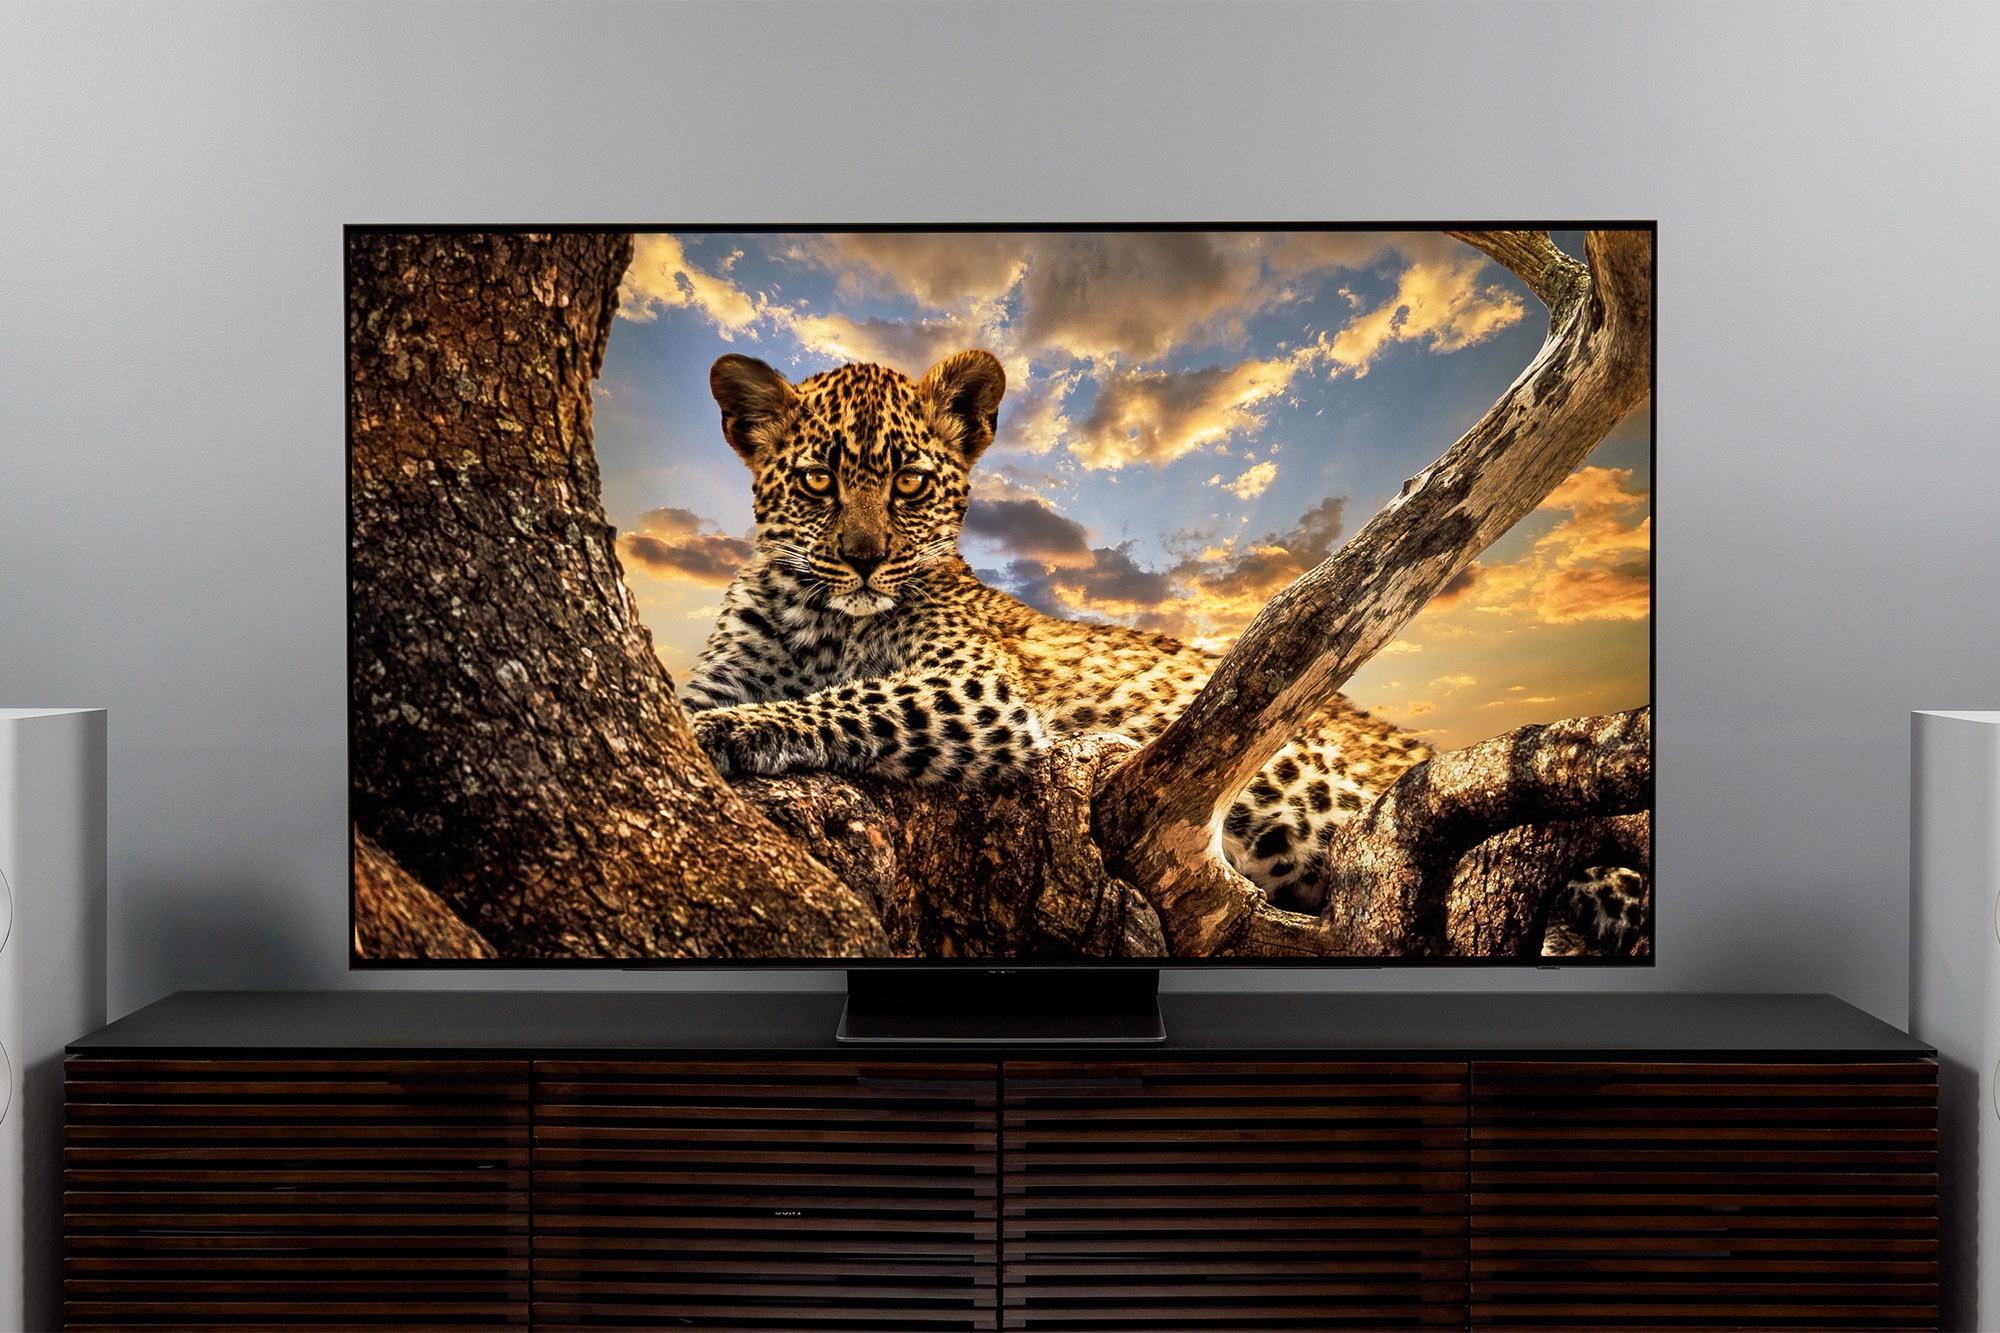 Best TVs of 2022: Smart TVs from LG, Samsung, TCL, and more | Tech Reader